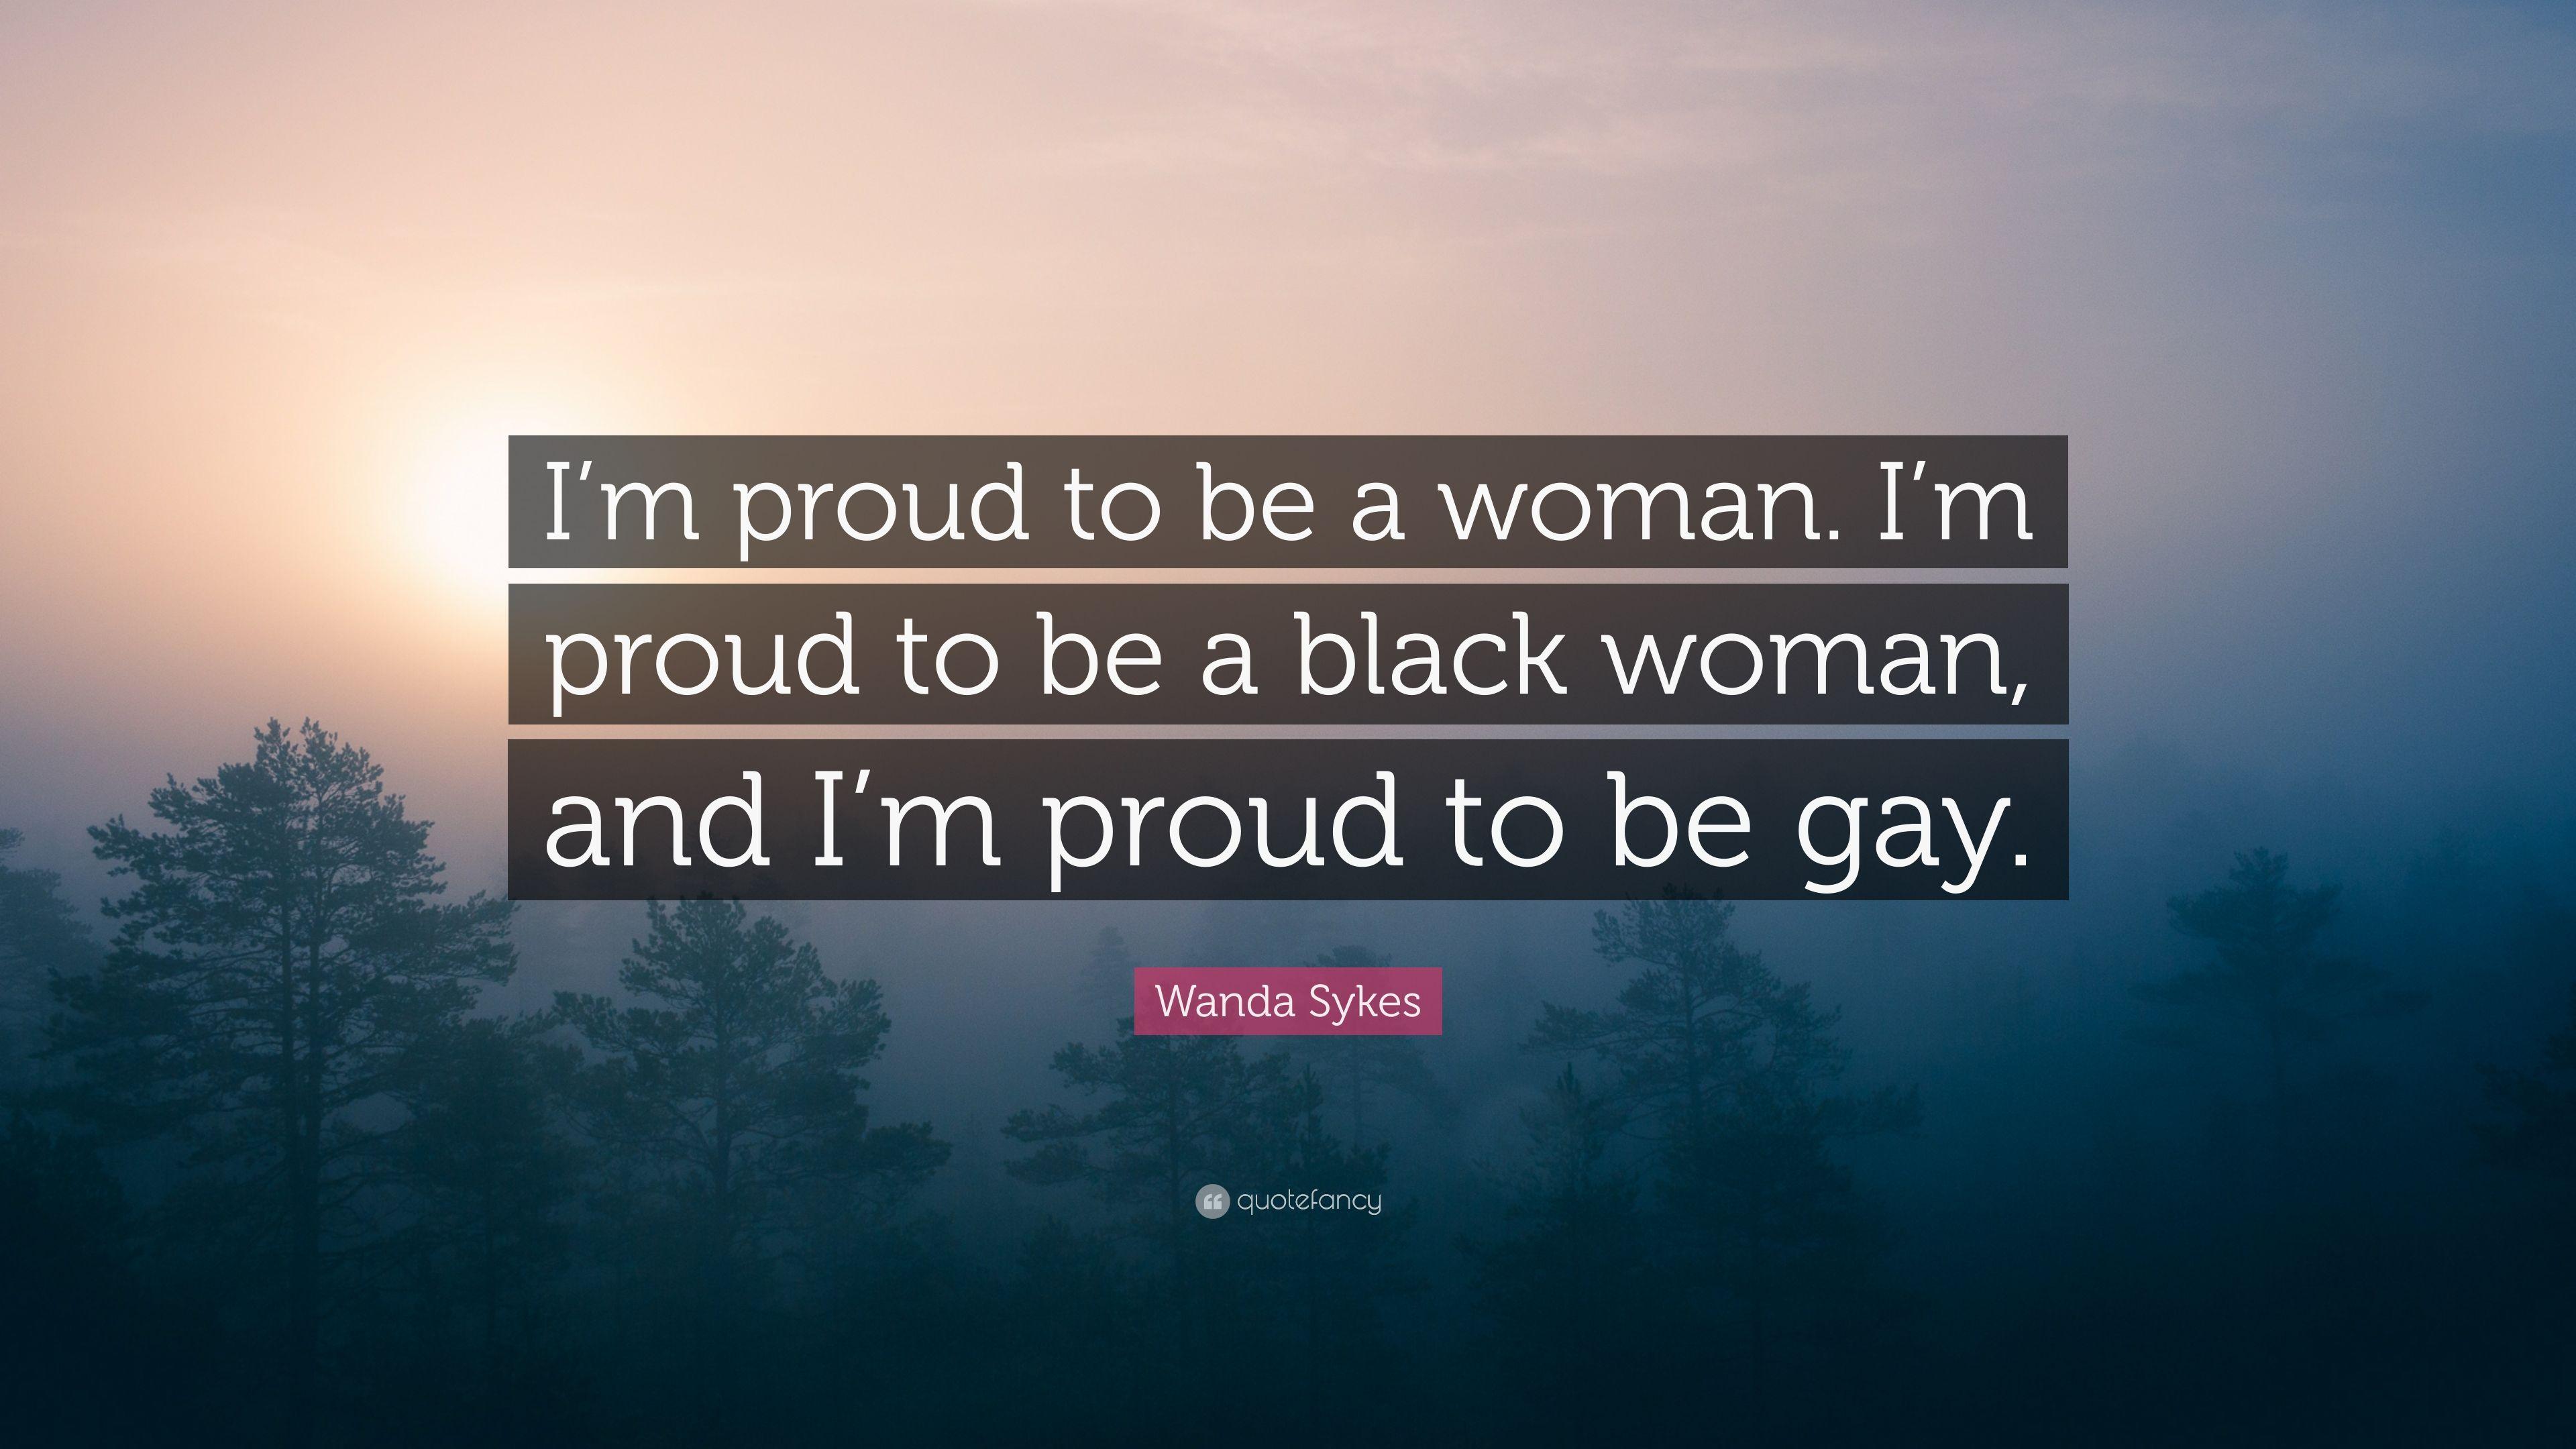 Wanda Sykes Quote: “I'm proud to be a woman. I'm proud to be a black